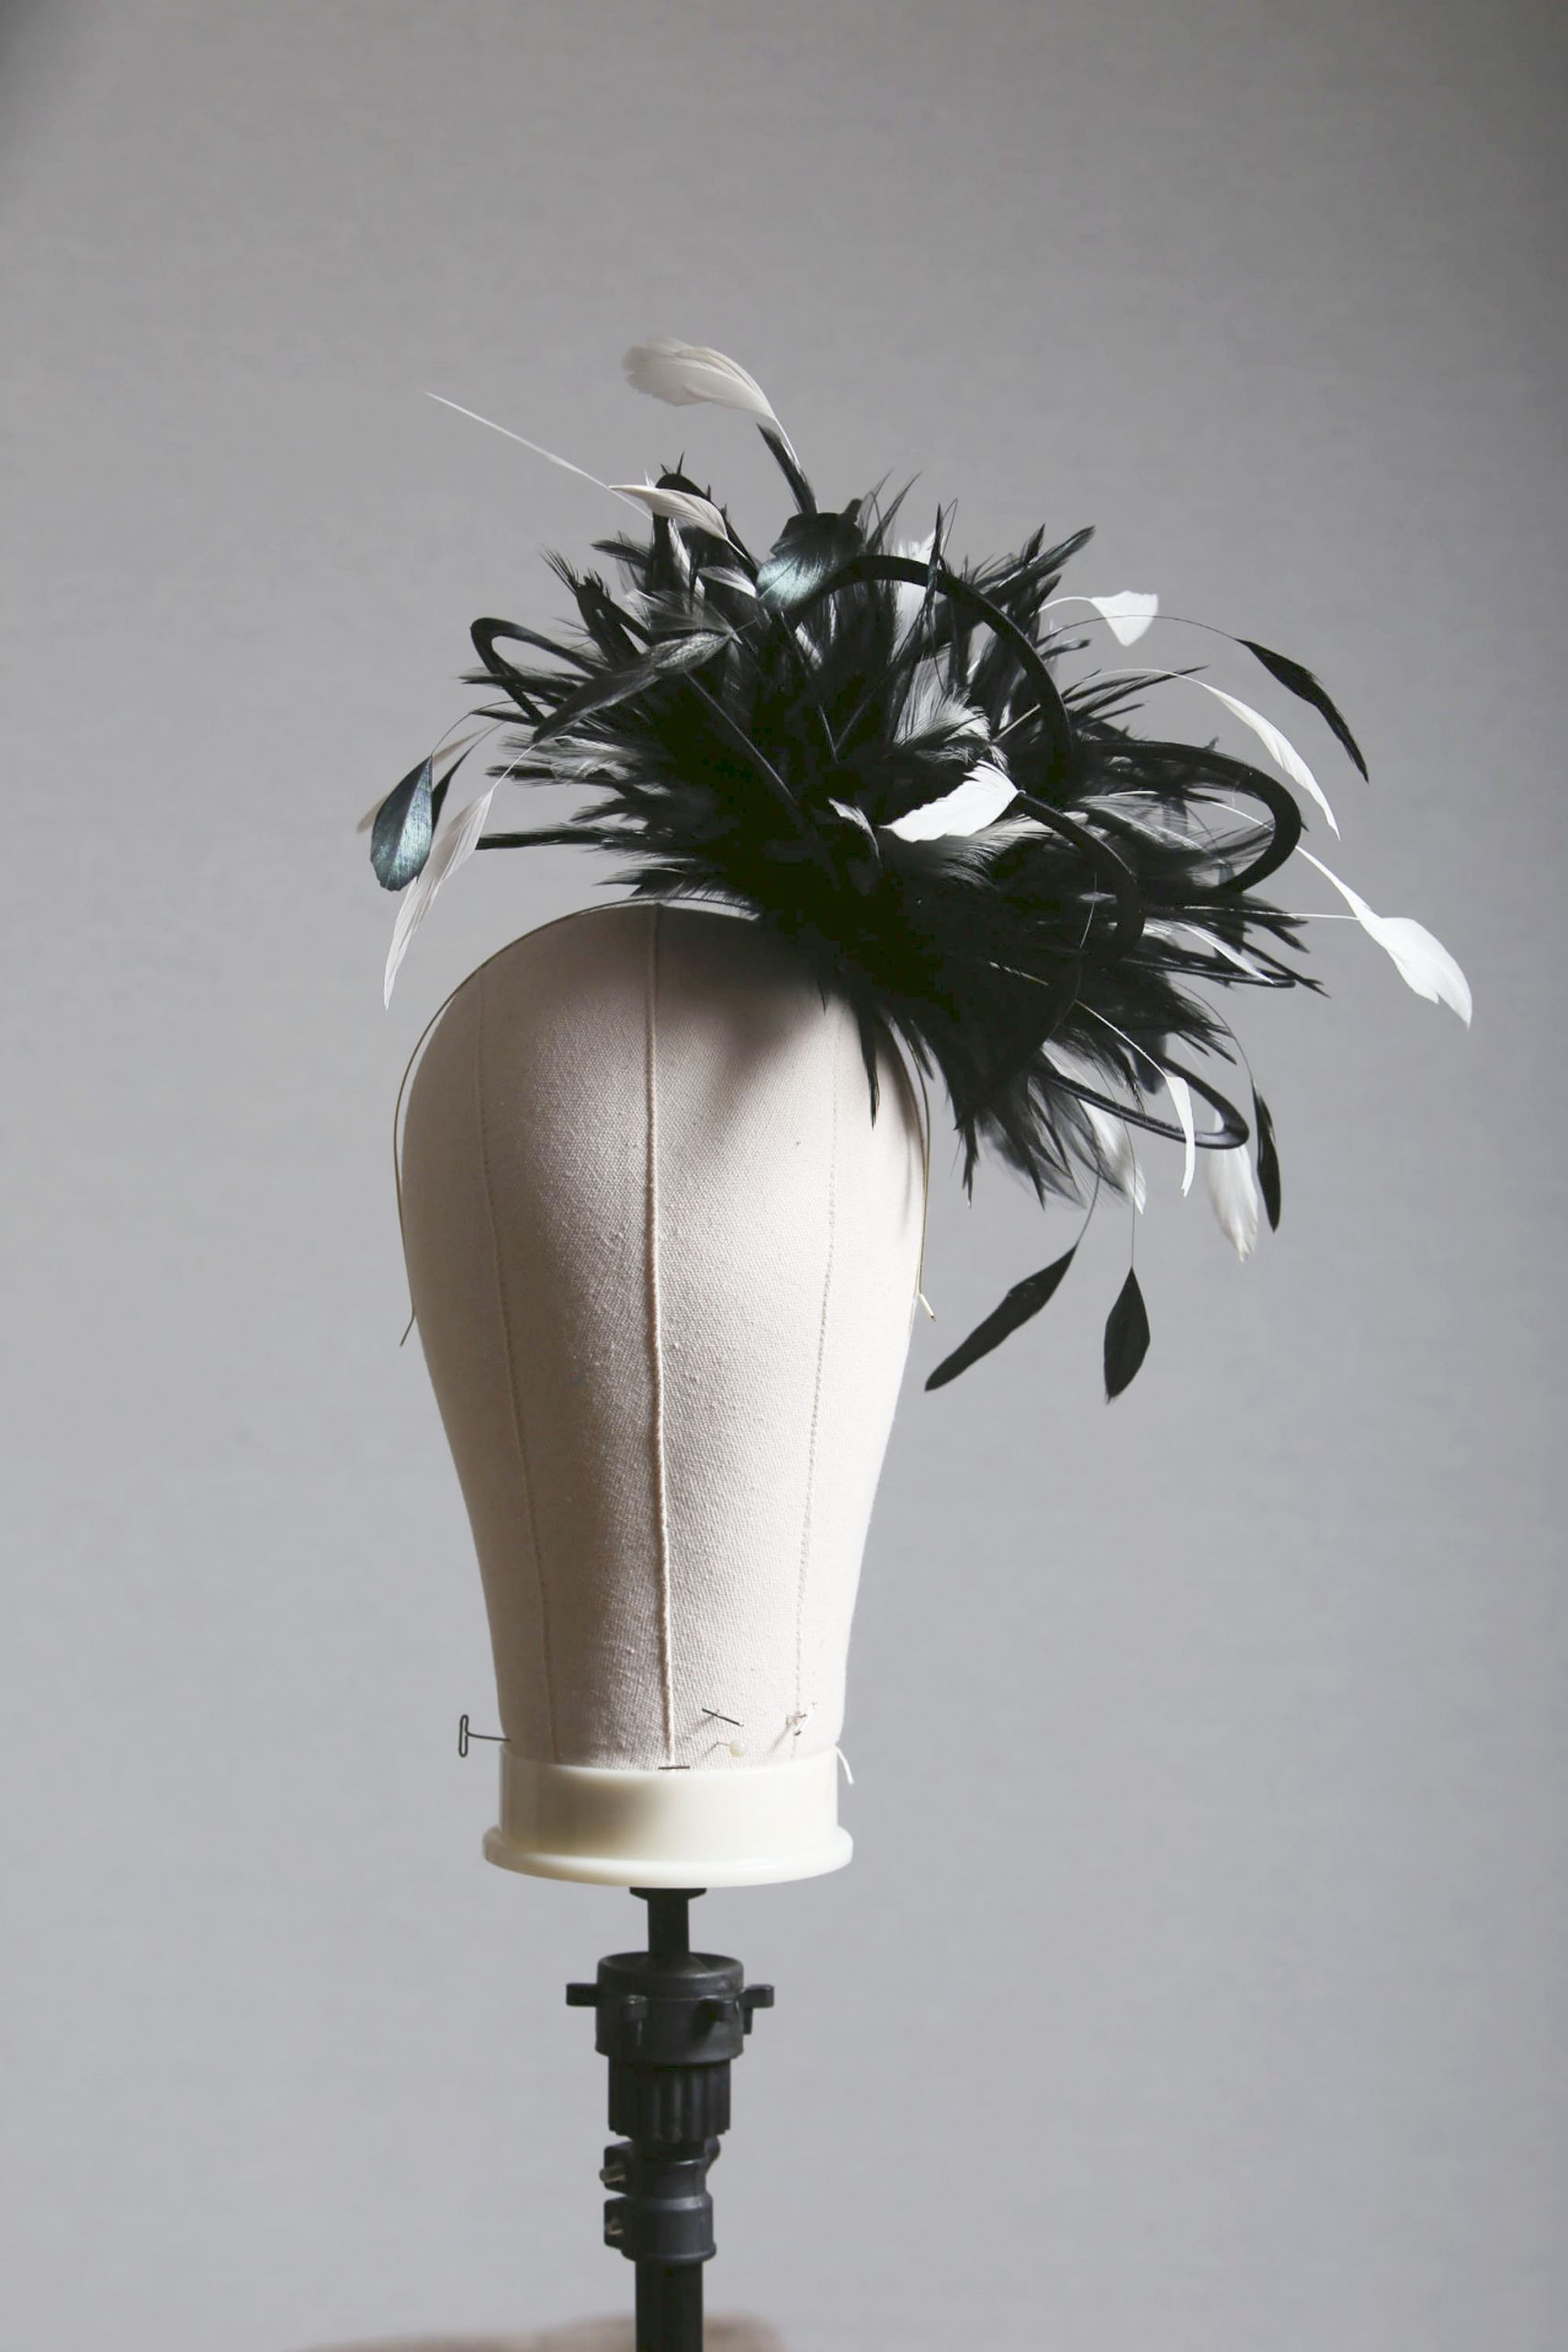 Ladies formal black and white medium feather and satin loop fascinator hat. Suitable for a wedding or ladies day at the races